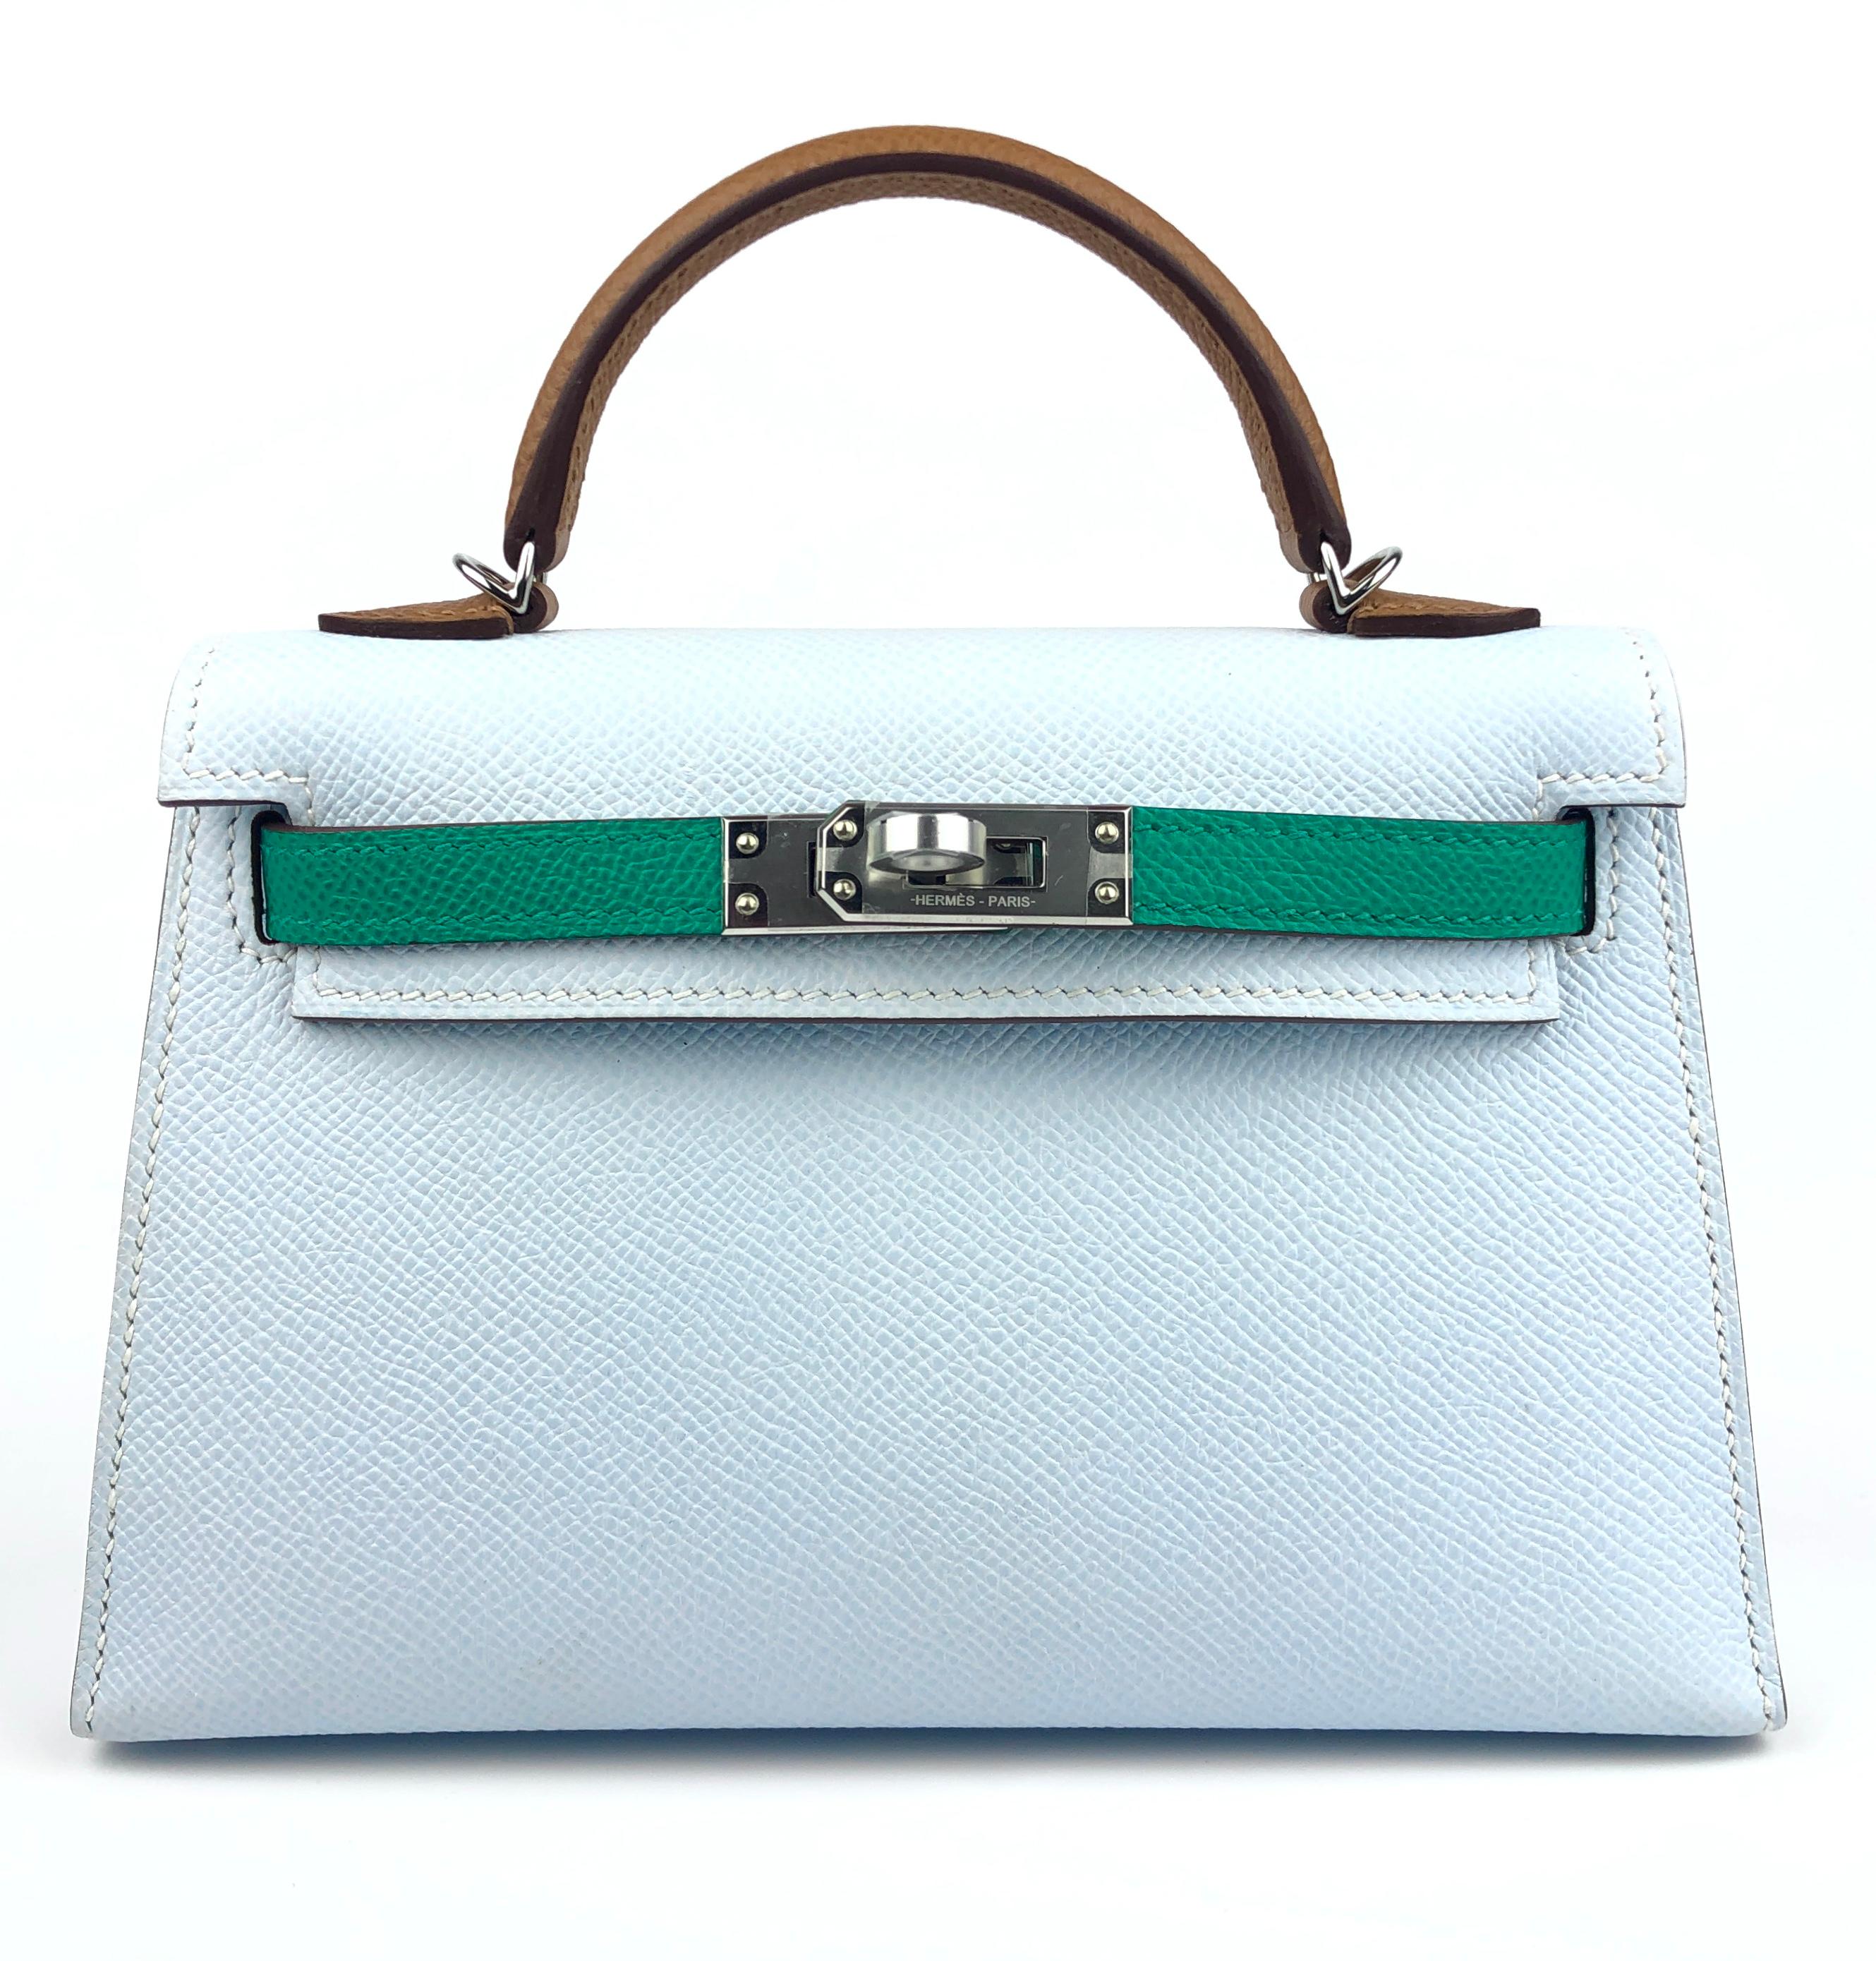 New 2022 Ultra Rare and Hardest to get Hermes Mini Kelly 20 Bleu Brume, Vert Jade, Gold Epsom Leather Complimented by Palladium Hardware. U Stamp 2022. From Collectors Closet, Has been displayed but never carried out. Please view interior photo very